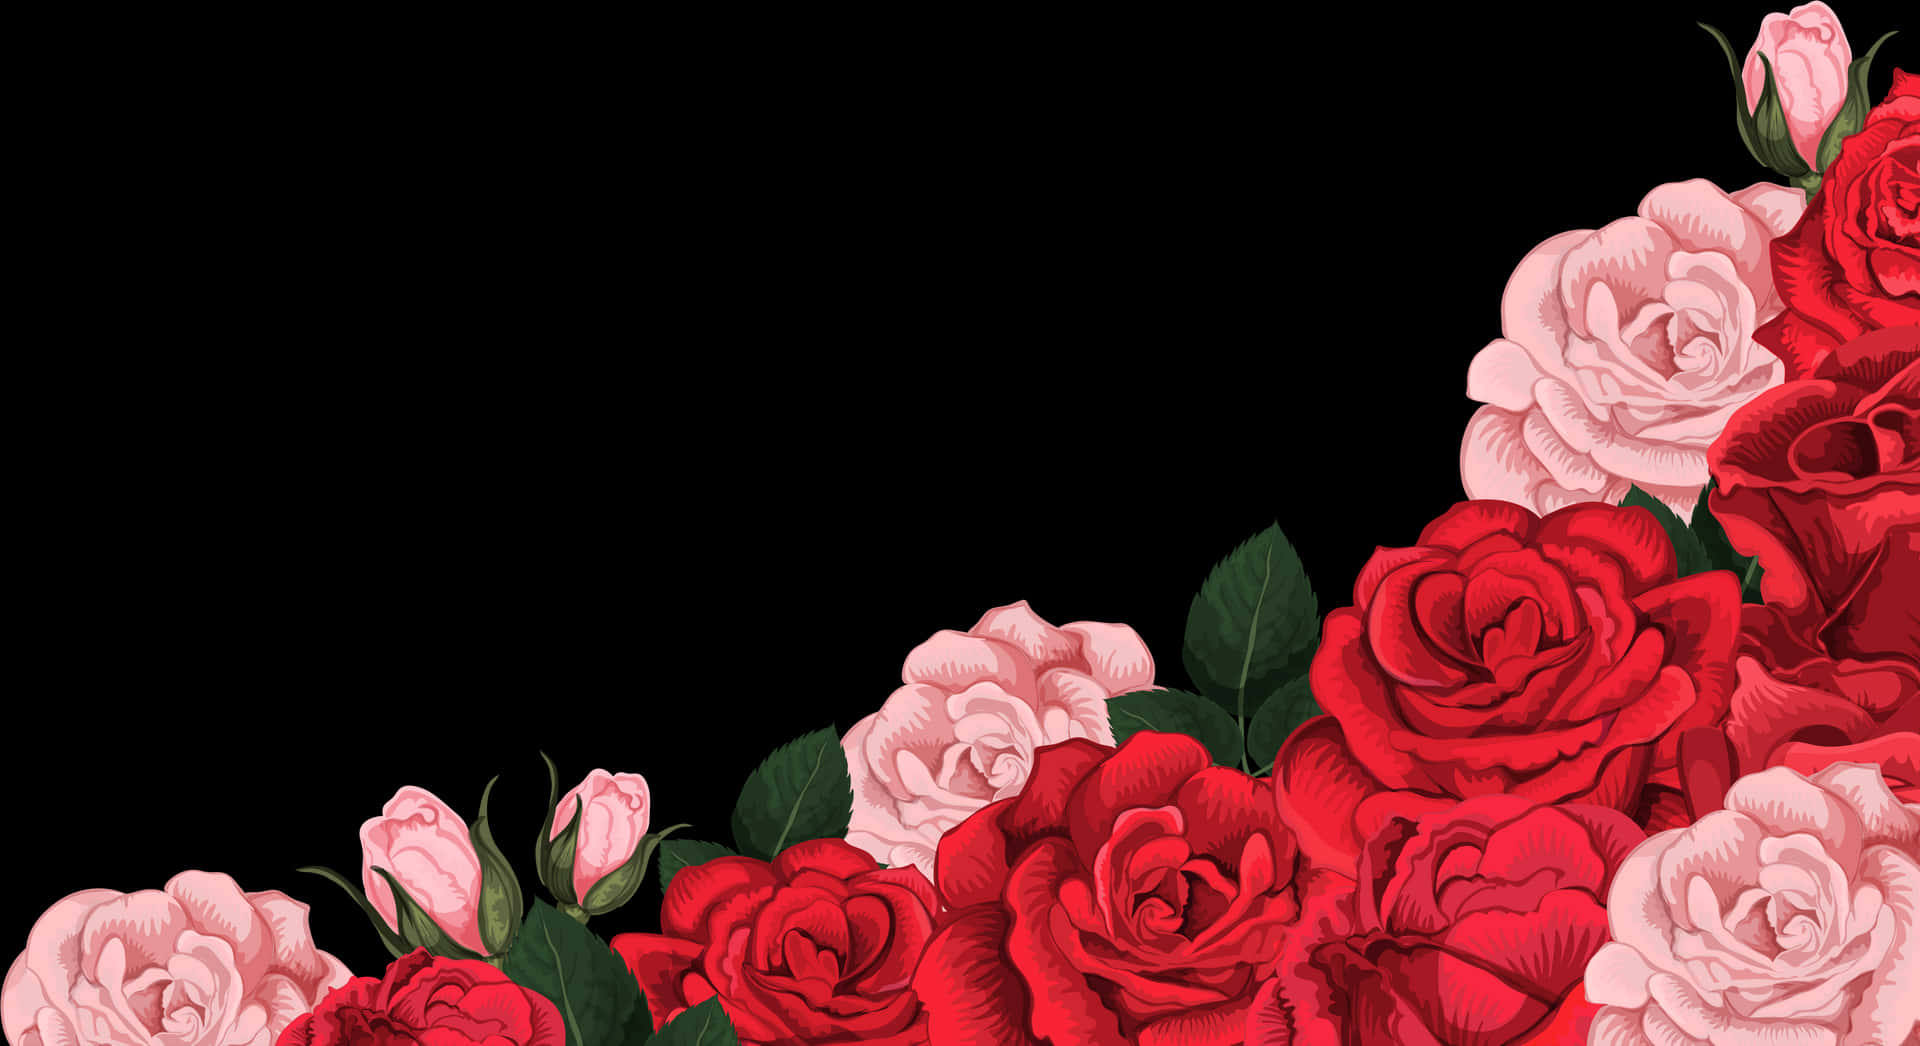 Redand Pink Roseson Black Background PNG